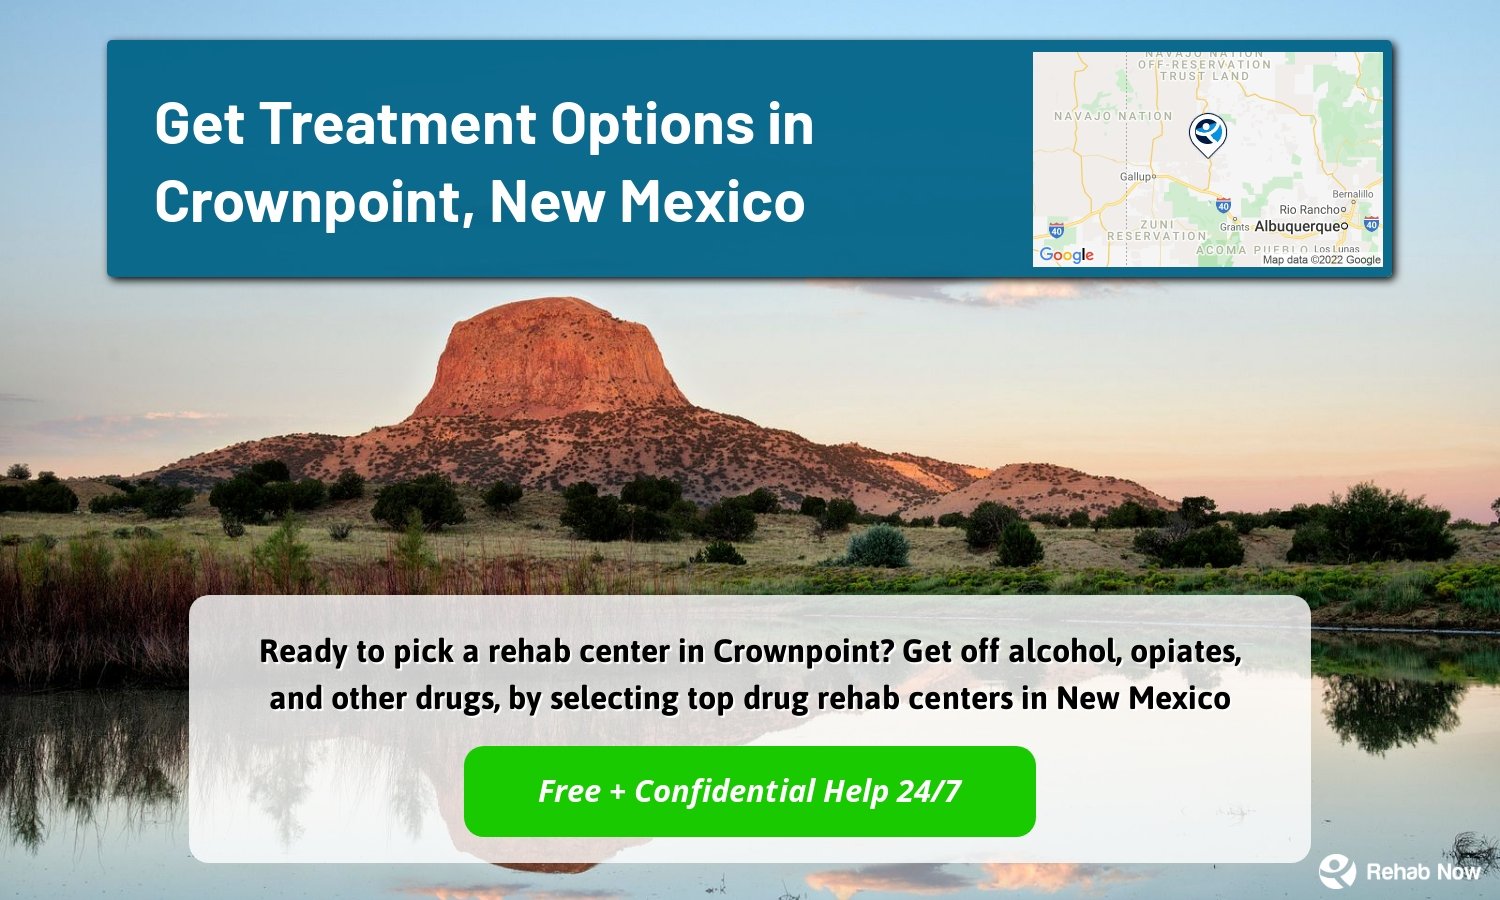 Ready to pick a rehab center in Crownpoint? Get off alcohol, opiates, and other drugs, by selecting top drug rehab centers in New Mexico